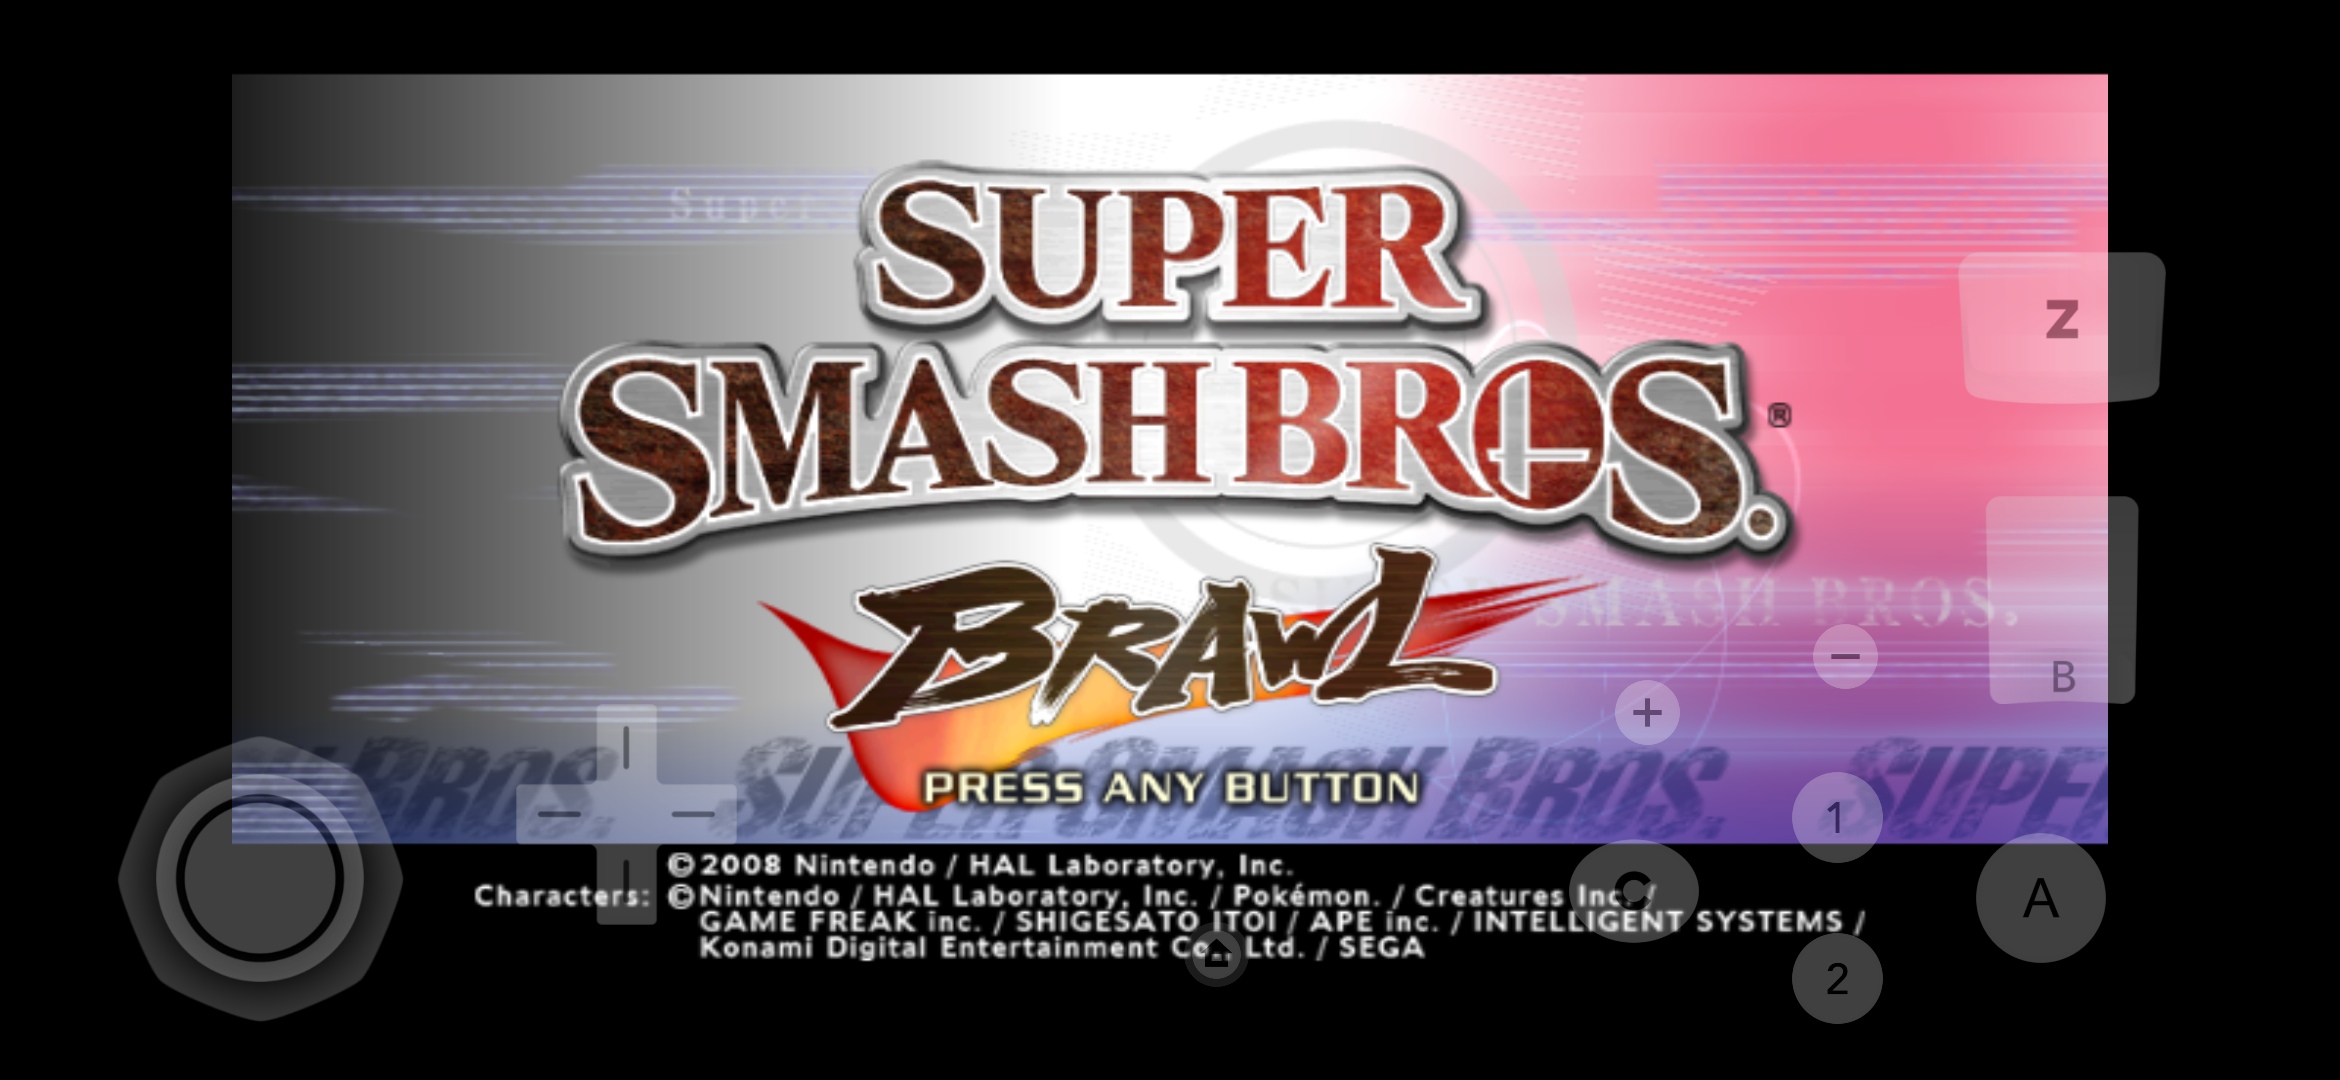 Download And How To Install Game Wii Super Smash Bros Brawl For Emulator Dolphin Android